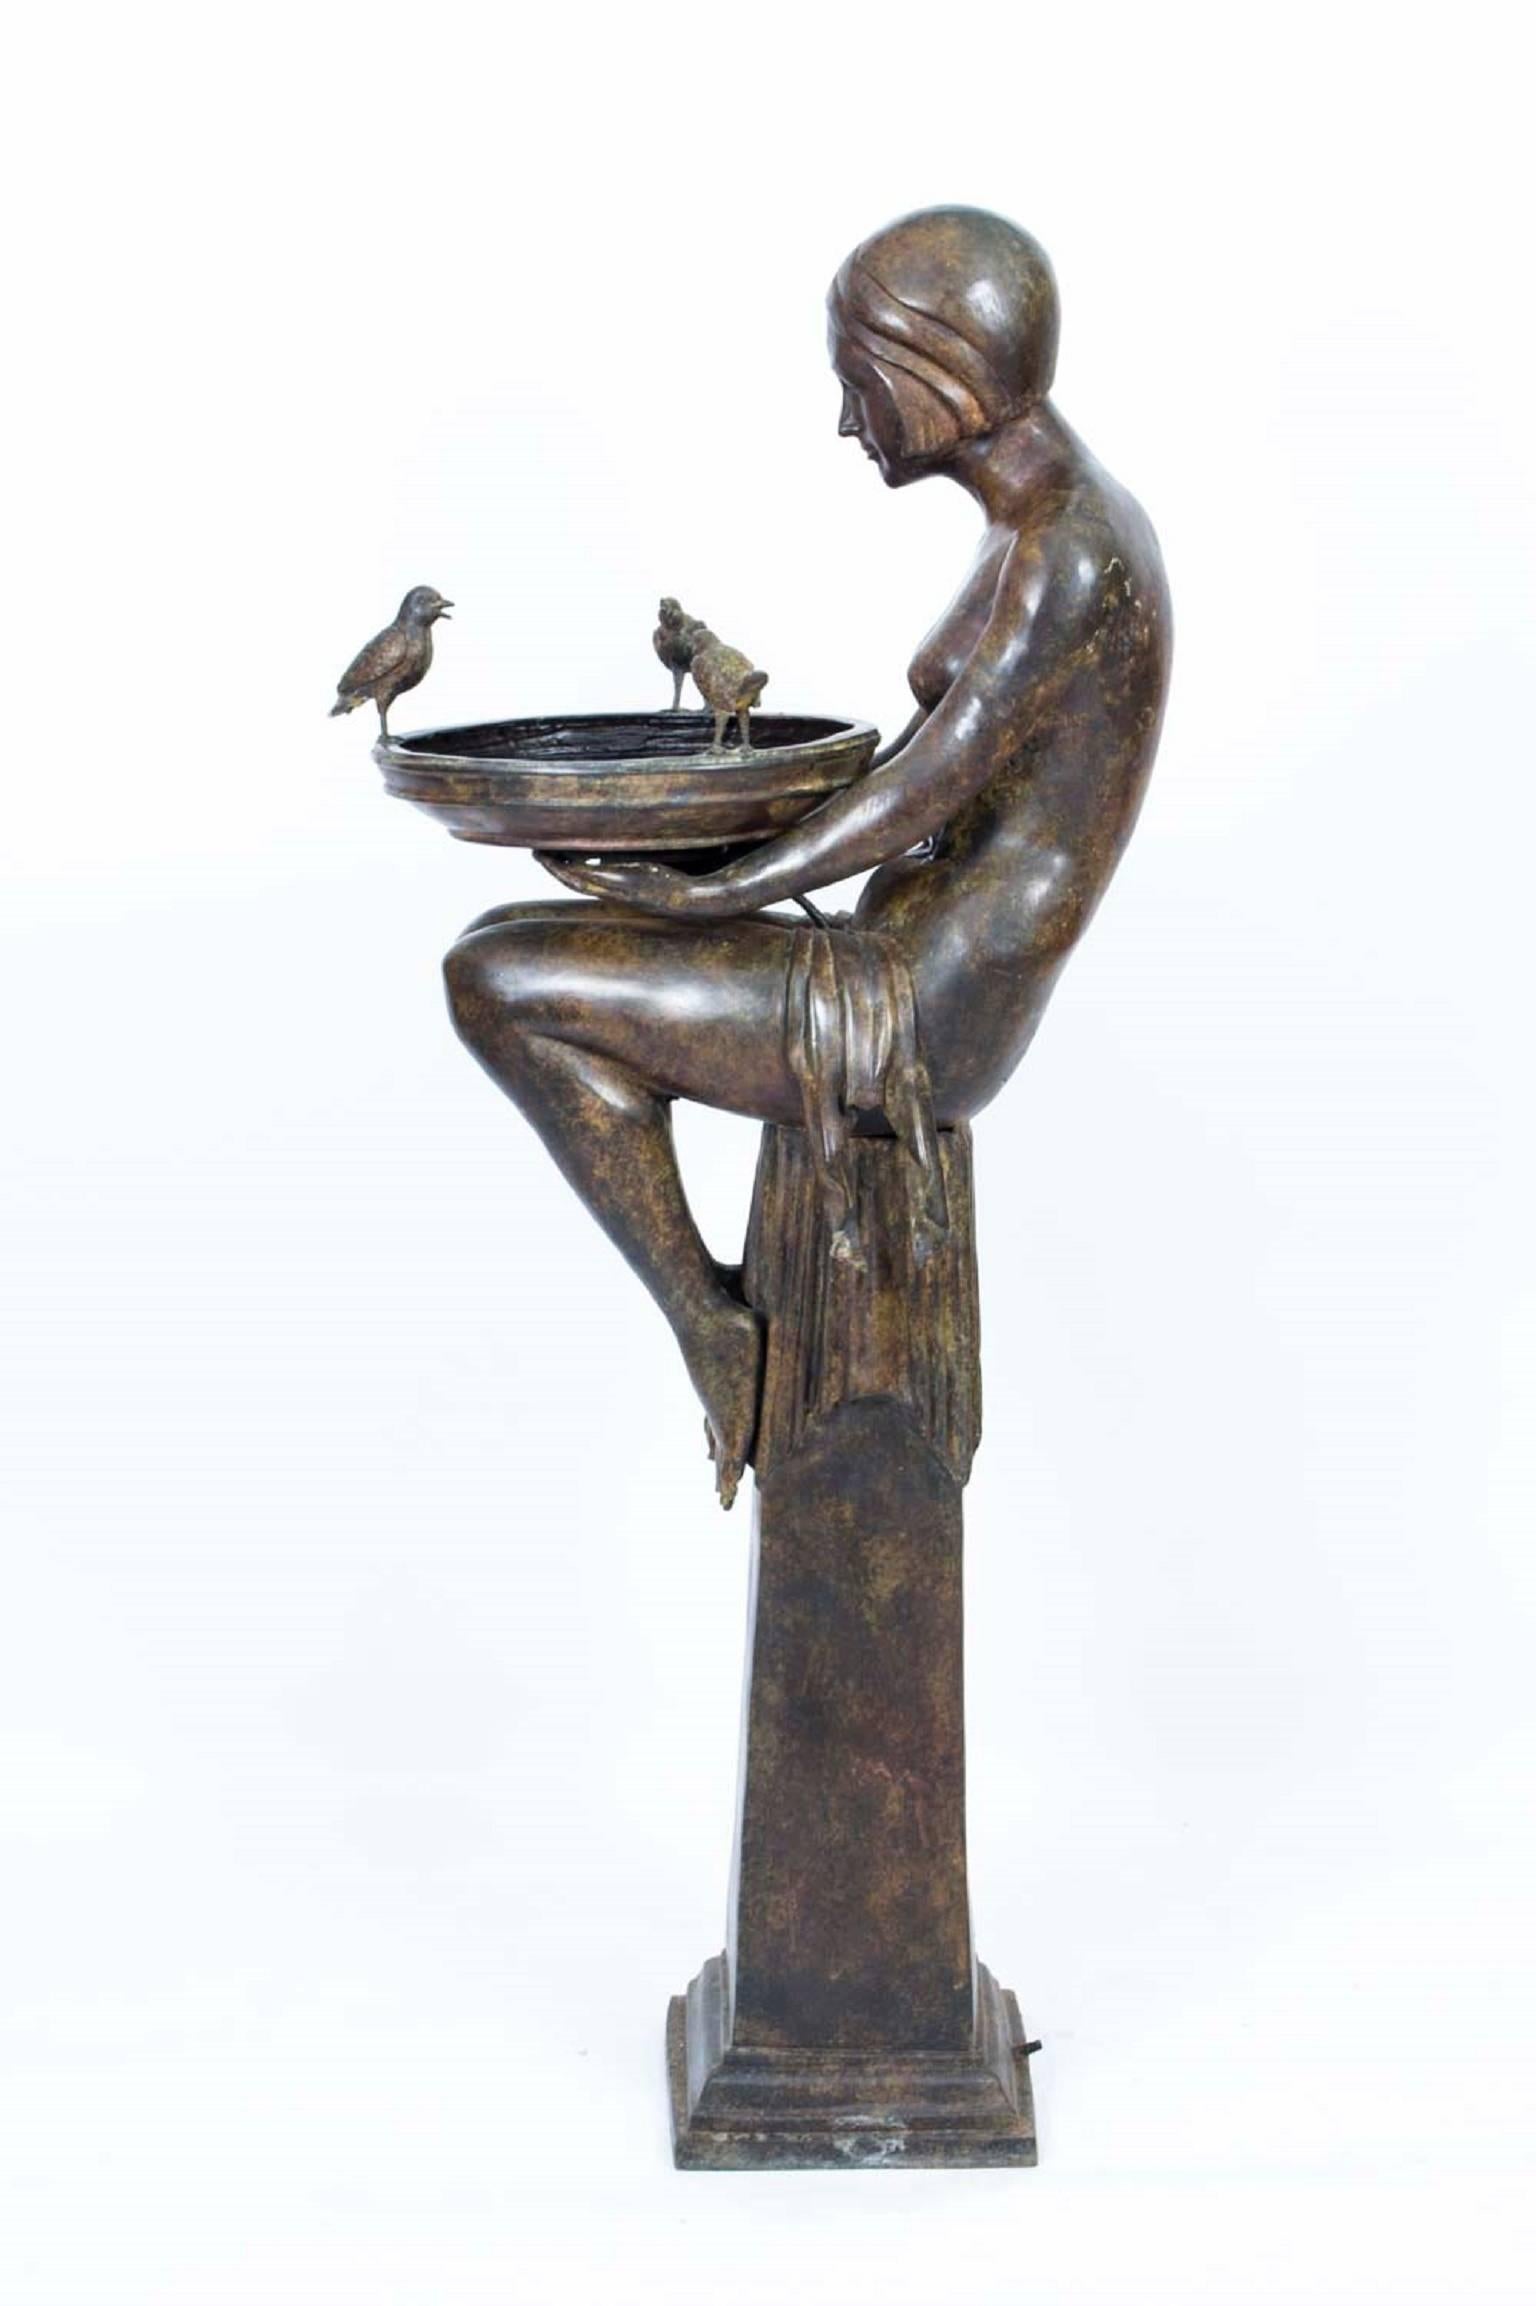 An absolutely stunning solid bronze Art Deco style jardinière in the form of two seated semi naked ladies with classic Art Deco bob hair style holding a jardinière with three perched birds singing, raised on an elegant tapering stand, from the last